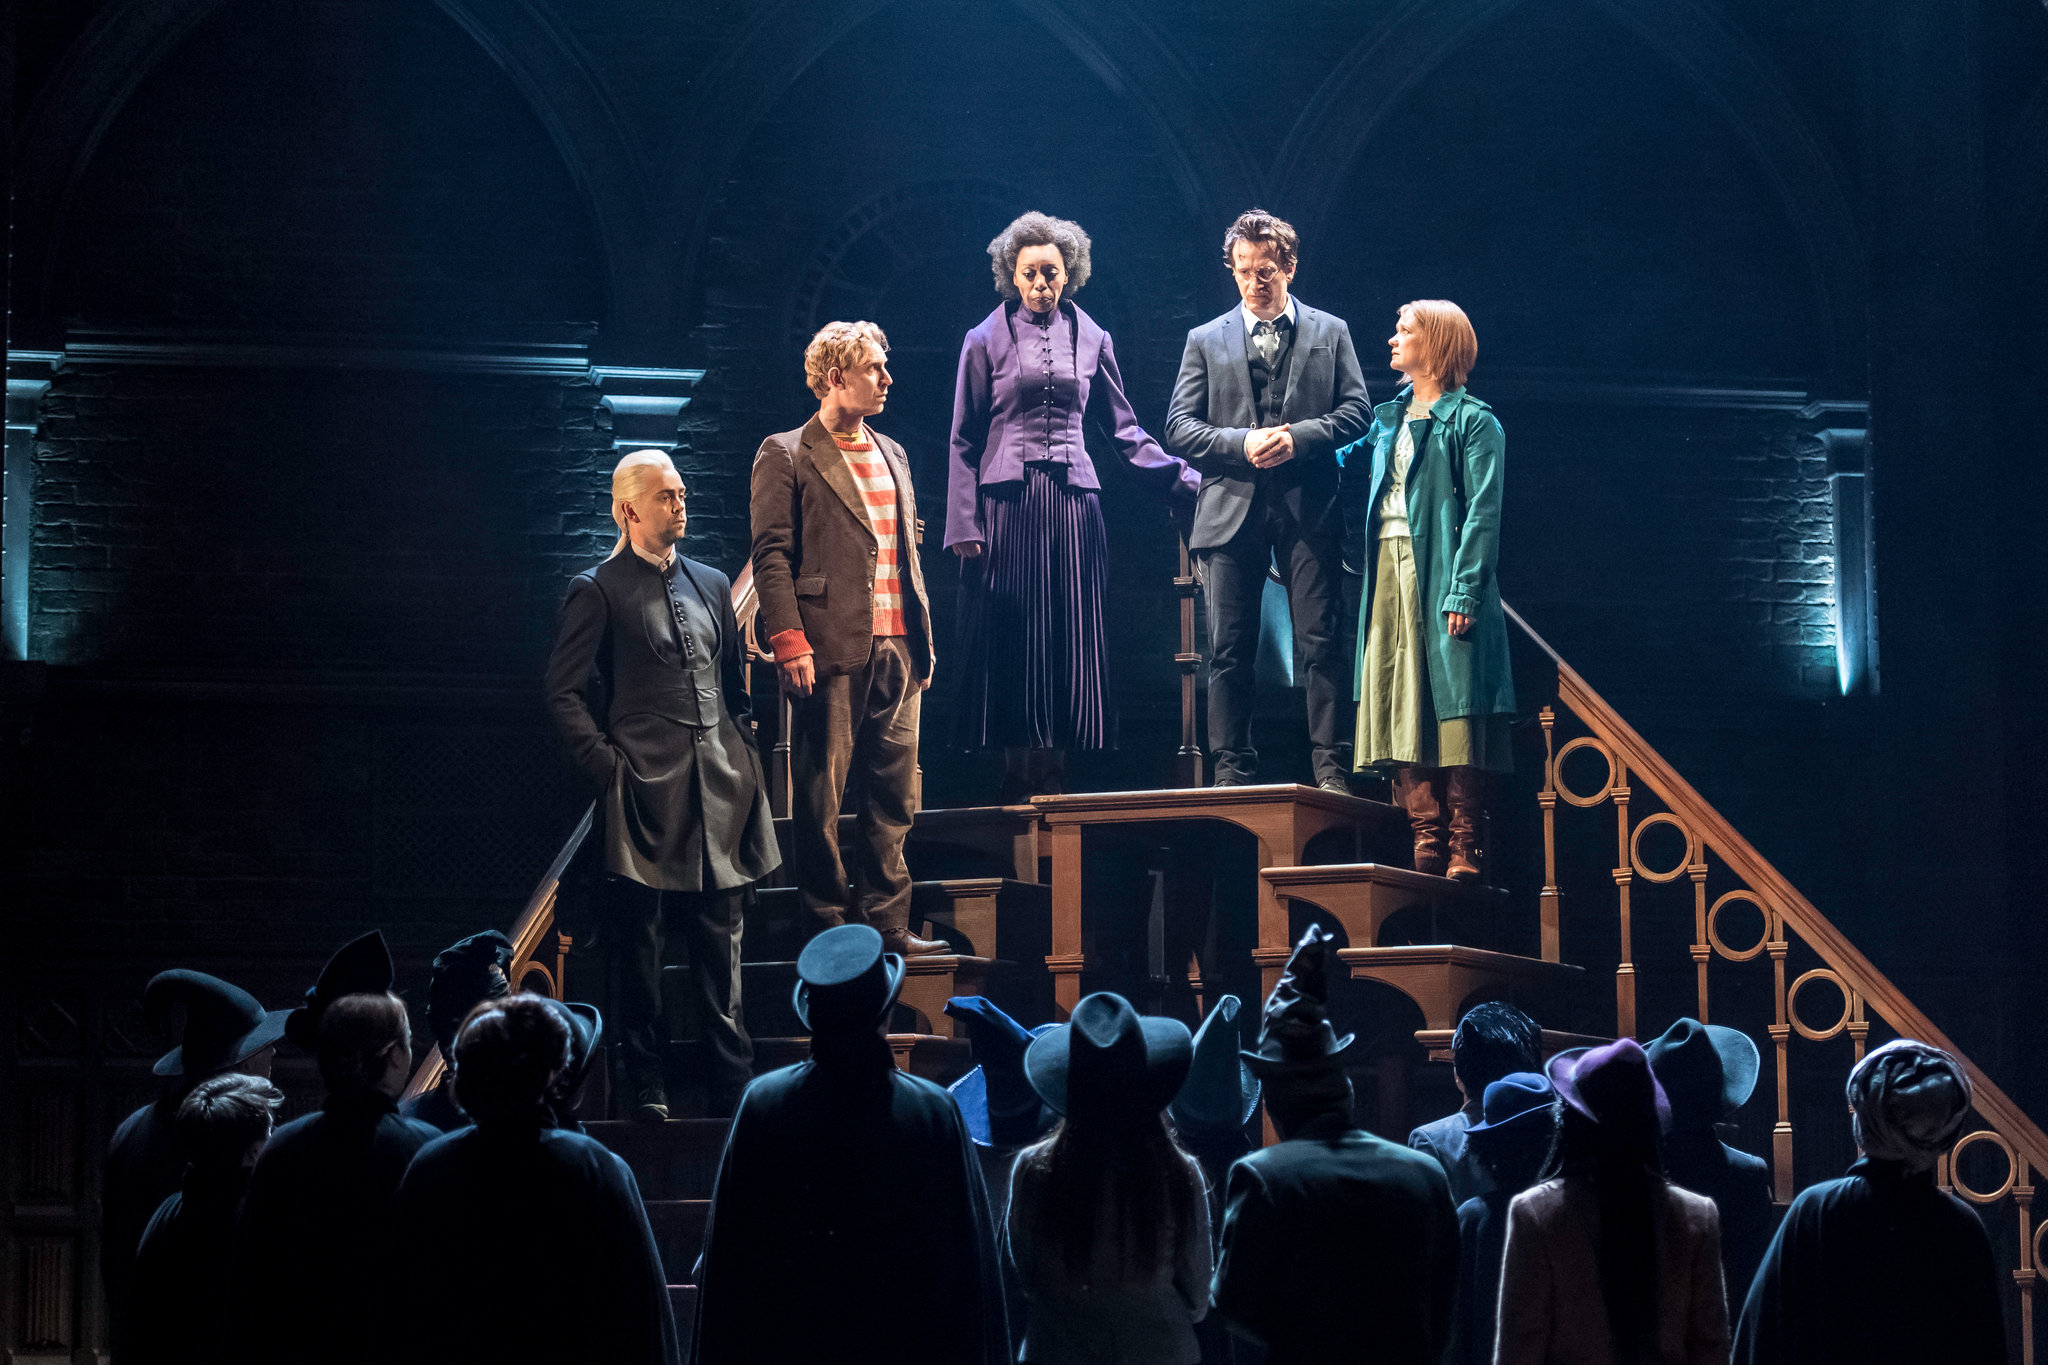 Harry Potter and The Cursed Child - Part 1 & 2 (5/14 7:30PM & 5/15 7:30PM) at Lyric Theatre